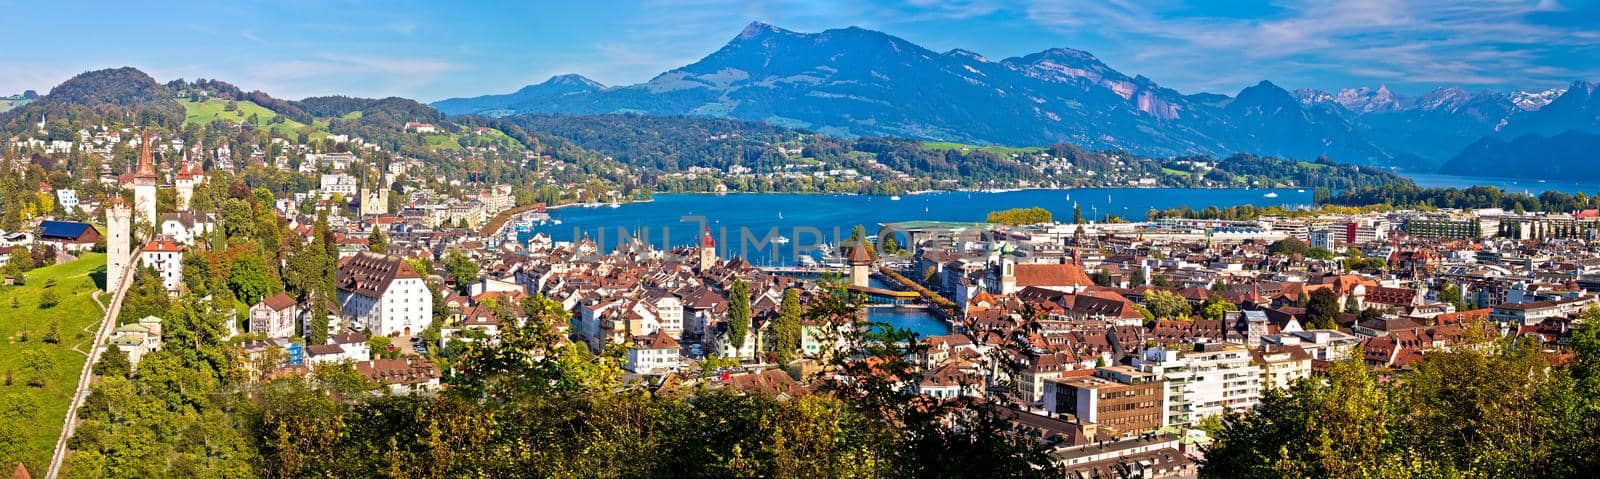 City and lake of Luzern panoramic view from the hill by xbrchx